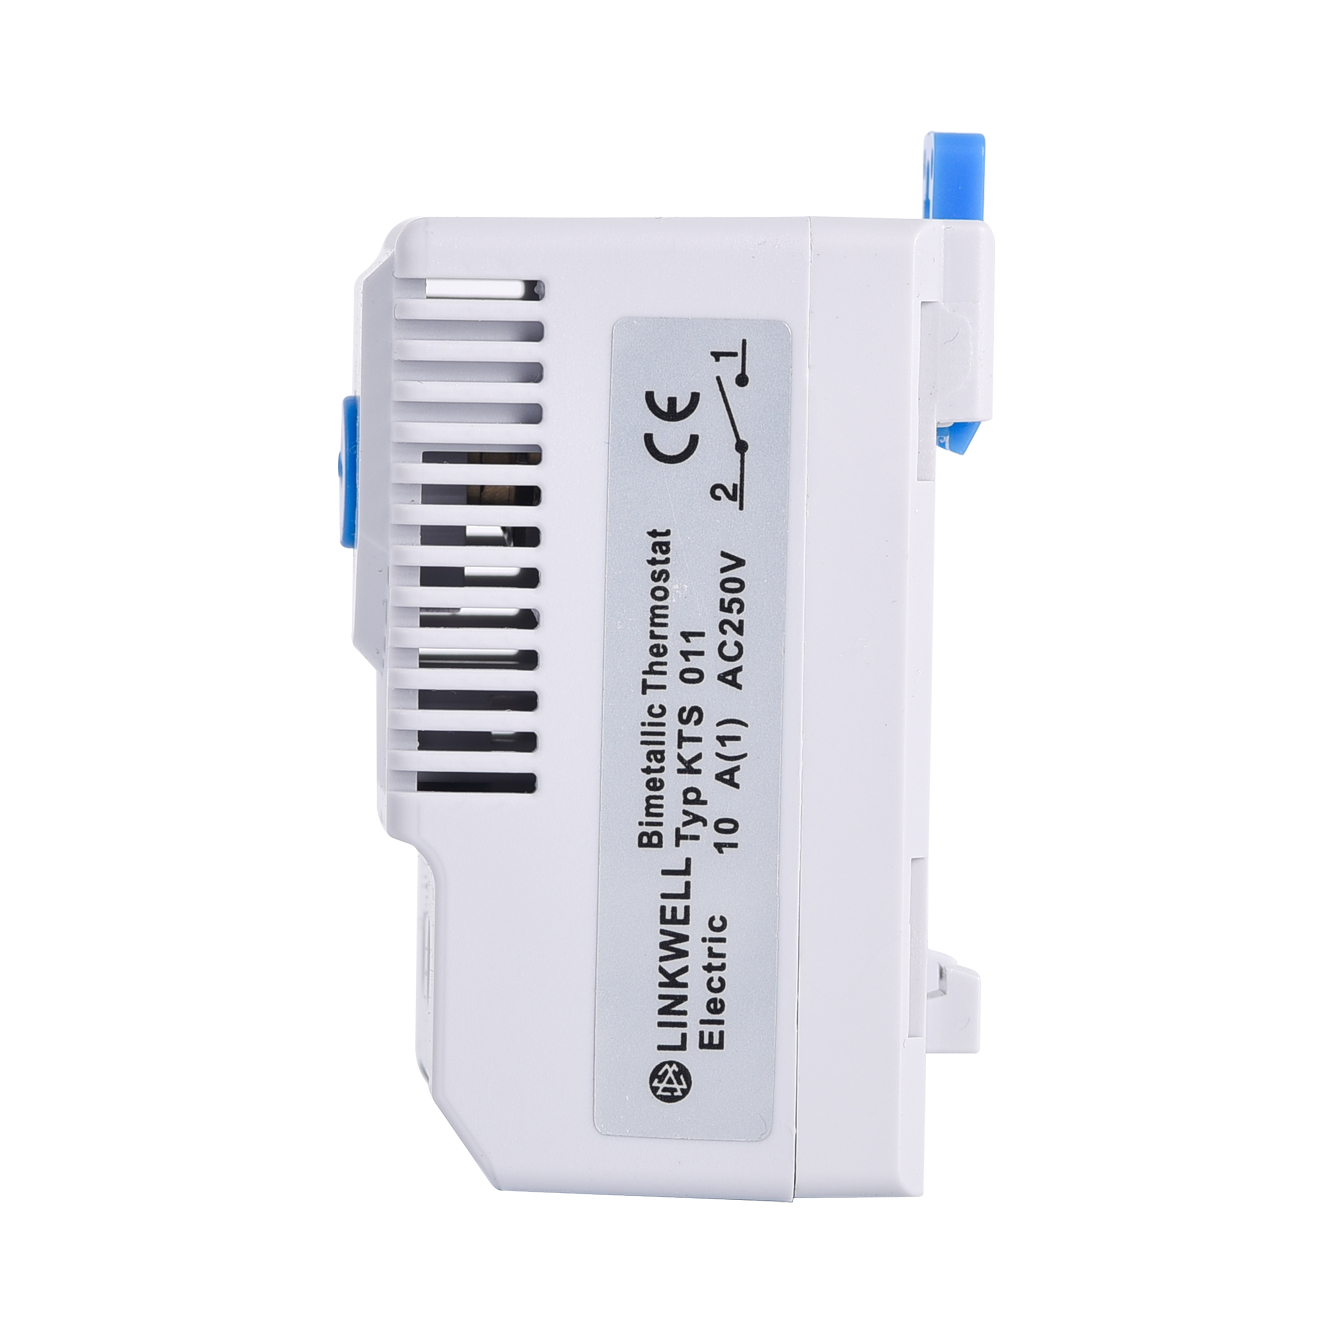 Normally open Adjustable temperature control switch thermostat controller for distribution box